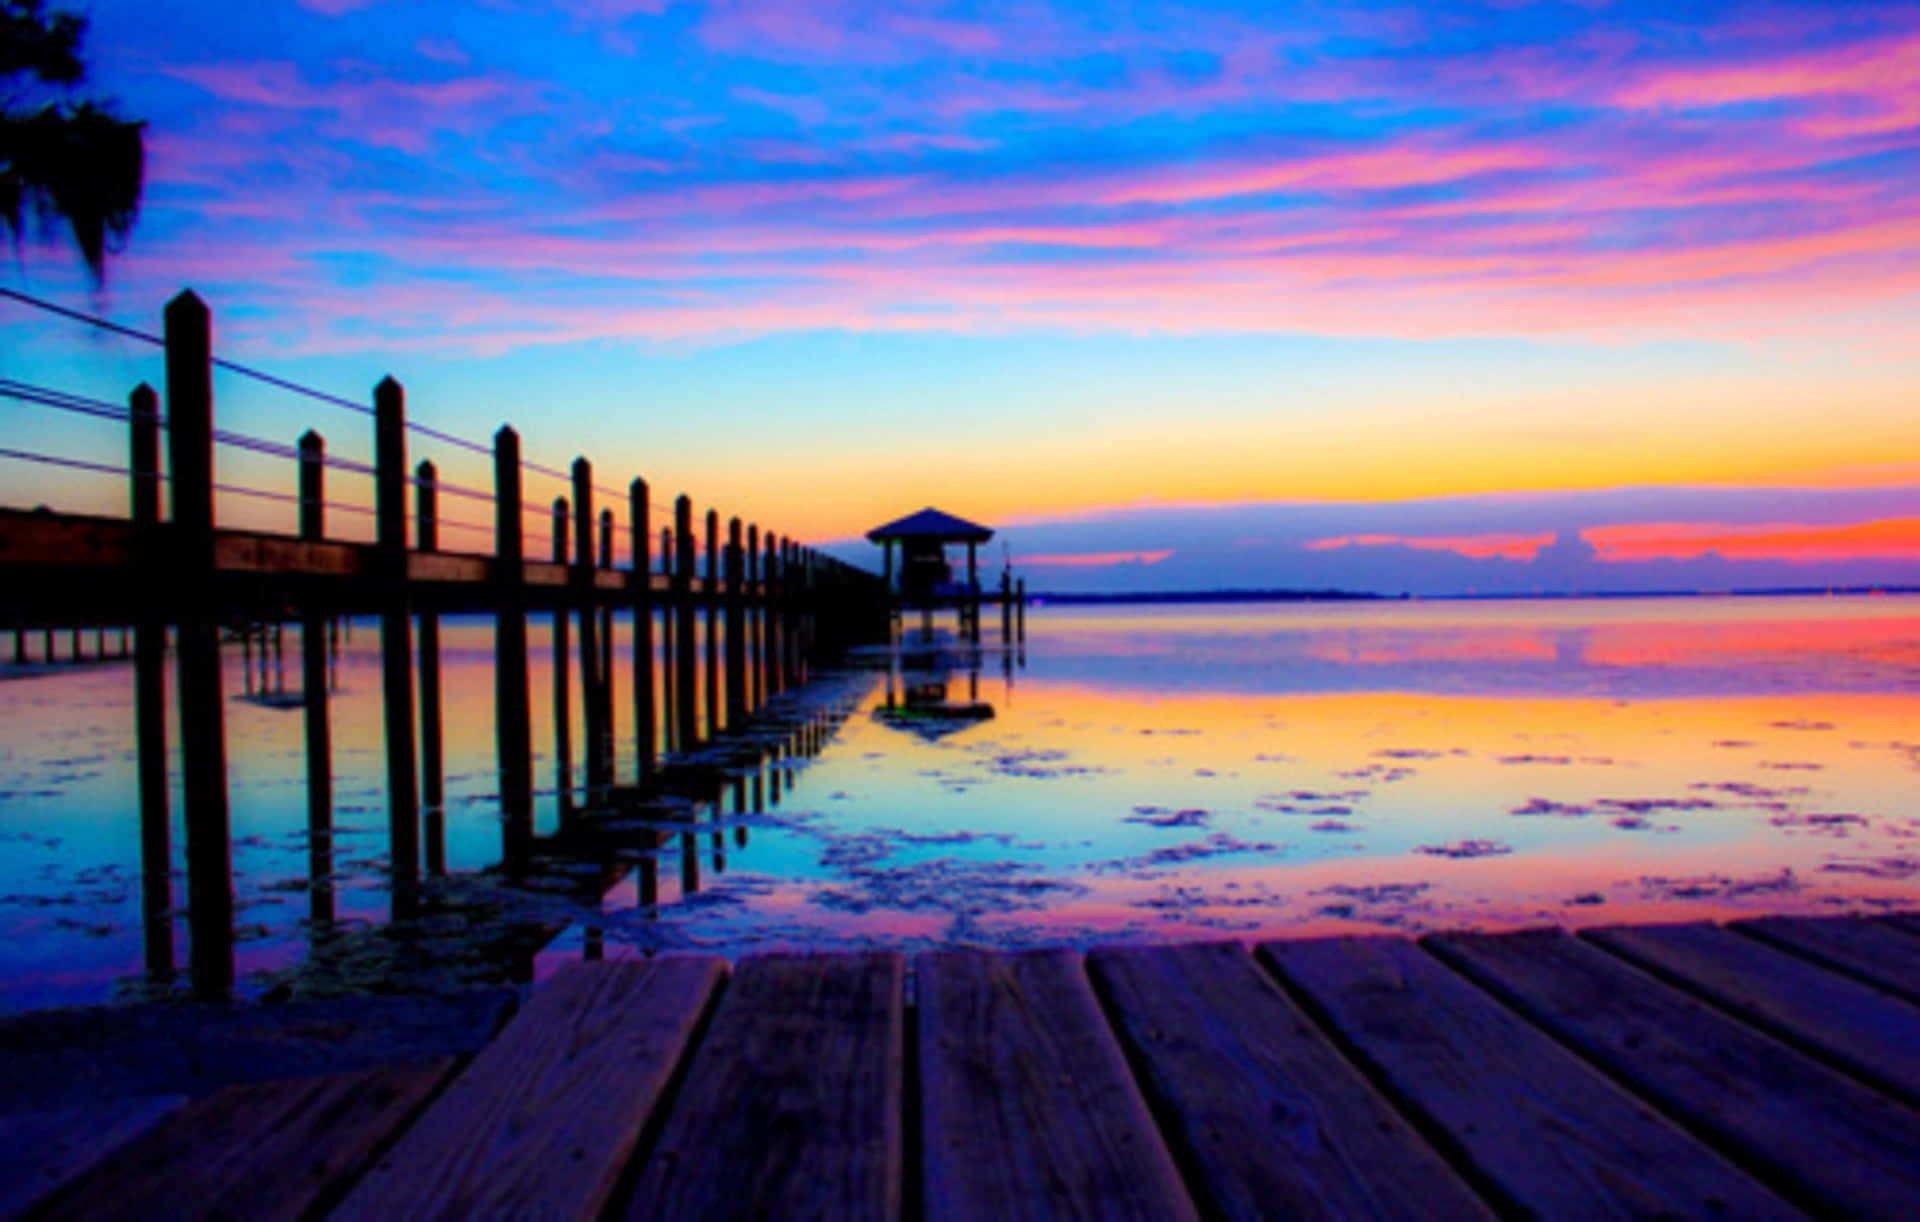 A Dock With A Colorful Sunset Wallpaper